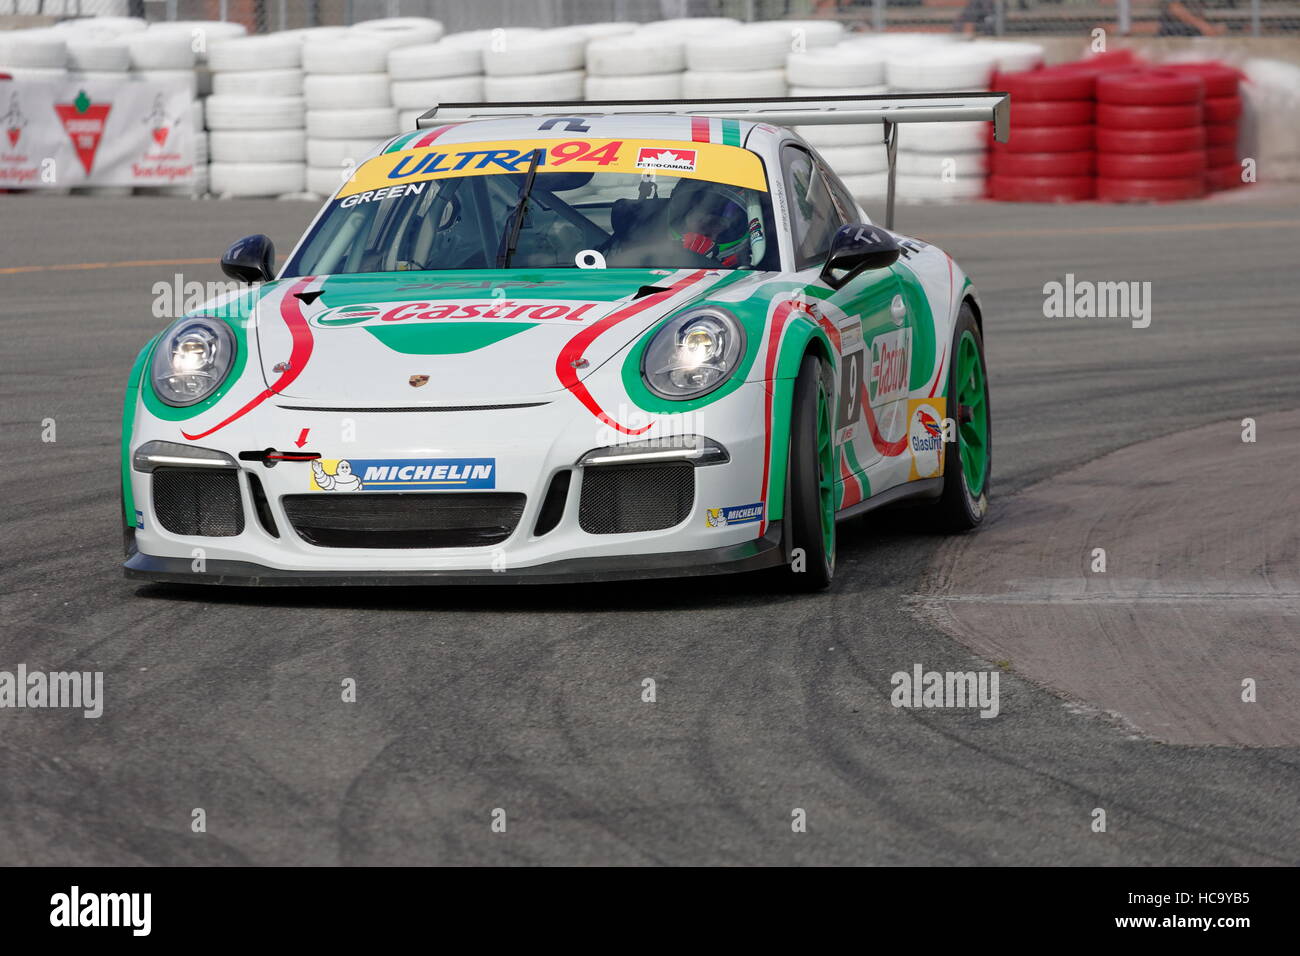 Car number 9, Christopher Green competing in the Porsche GT3 Cup Challenge Canada at the GP3R in Trois-Rivieres, Quebec Stock Photo